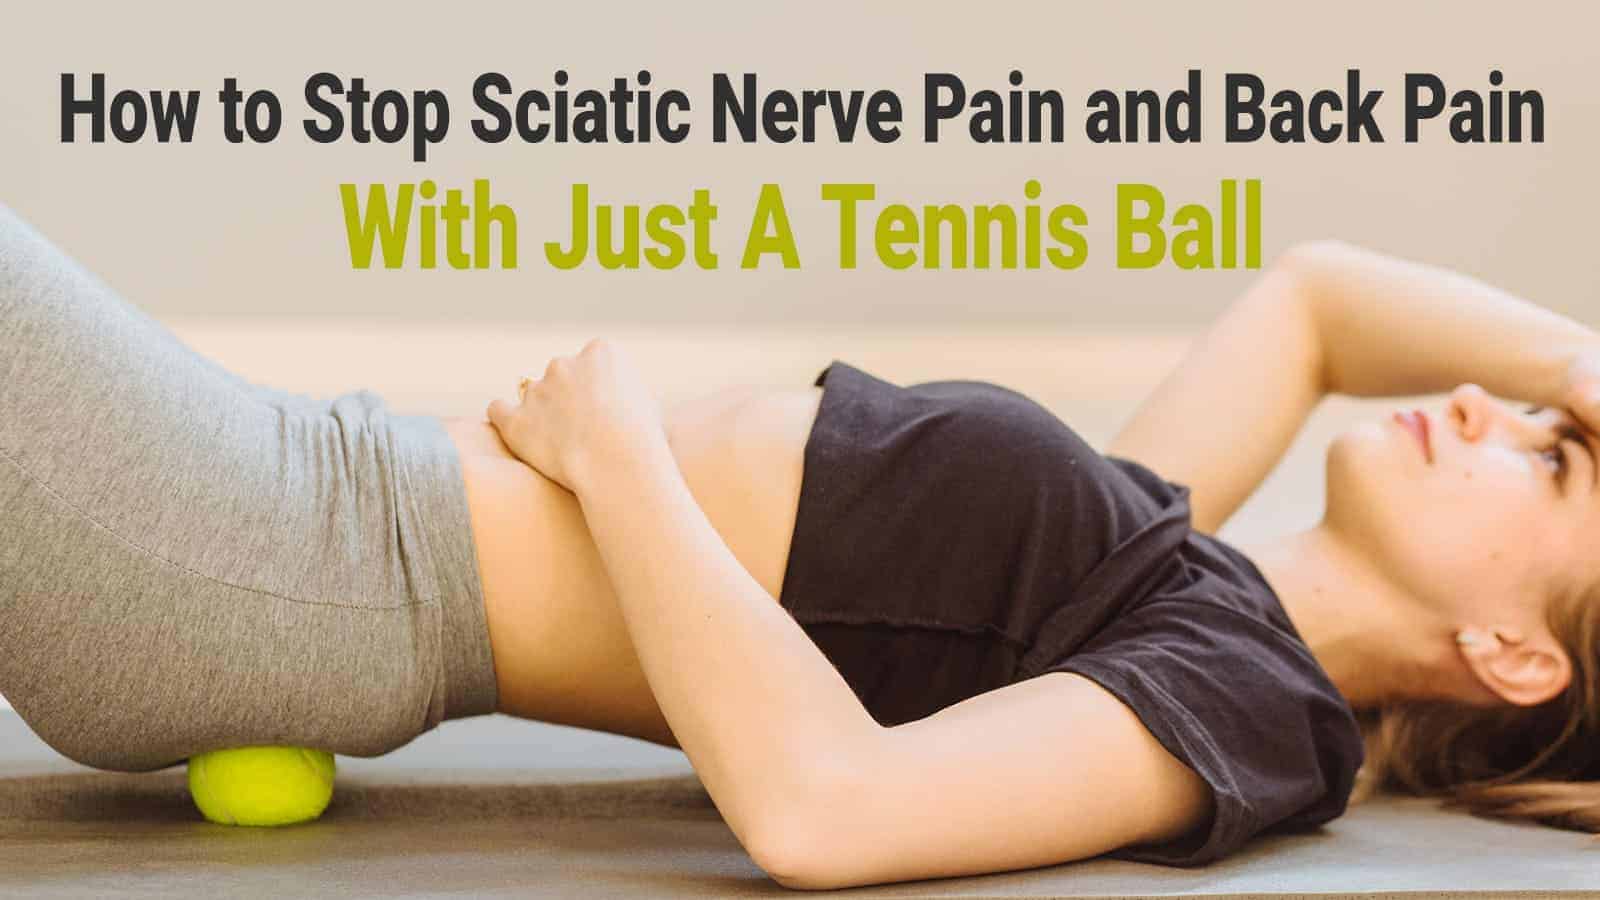 How to Stop Sciatic Nerve and Back Pain With Just A Tennis Ball